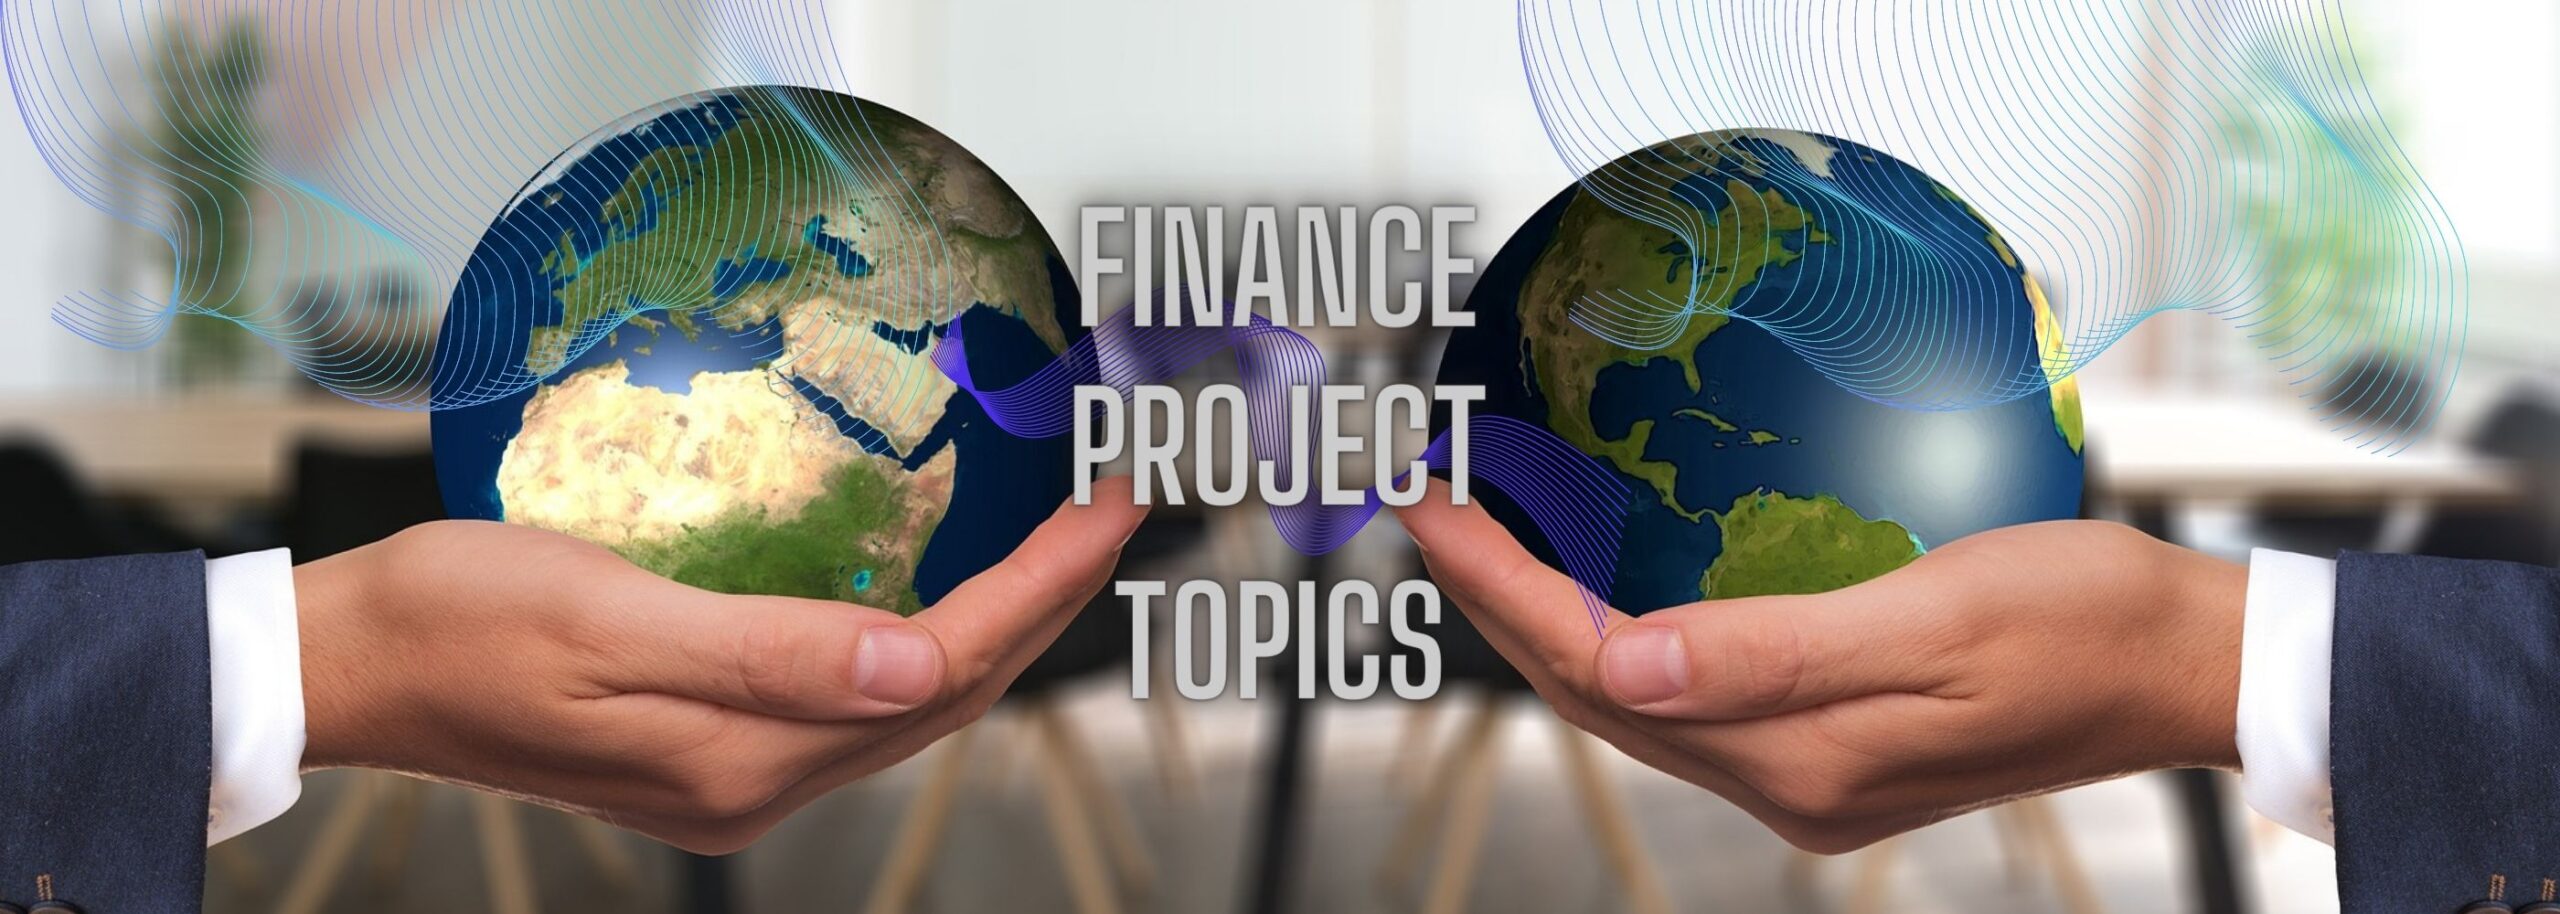 banking and finance research project topics